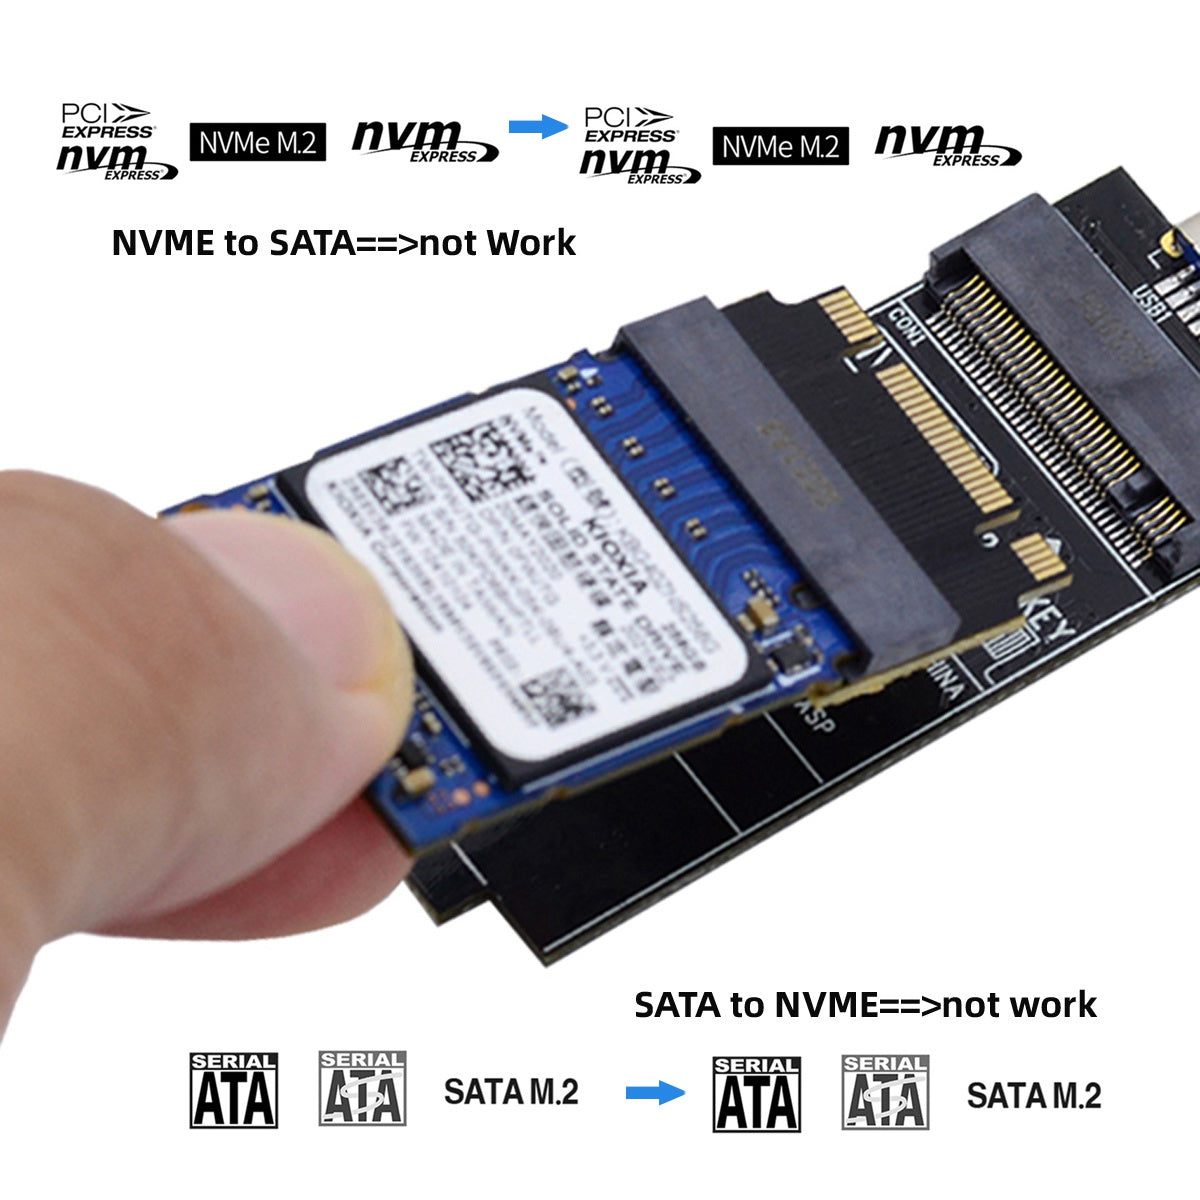 SA-047 NGFF B+M Key NVME M-Key 2230 to 2242 Male to Female Extension Adapter Card for 2230 2242 SSD